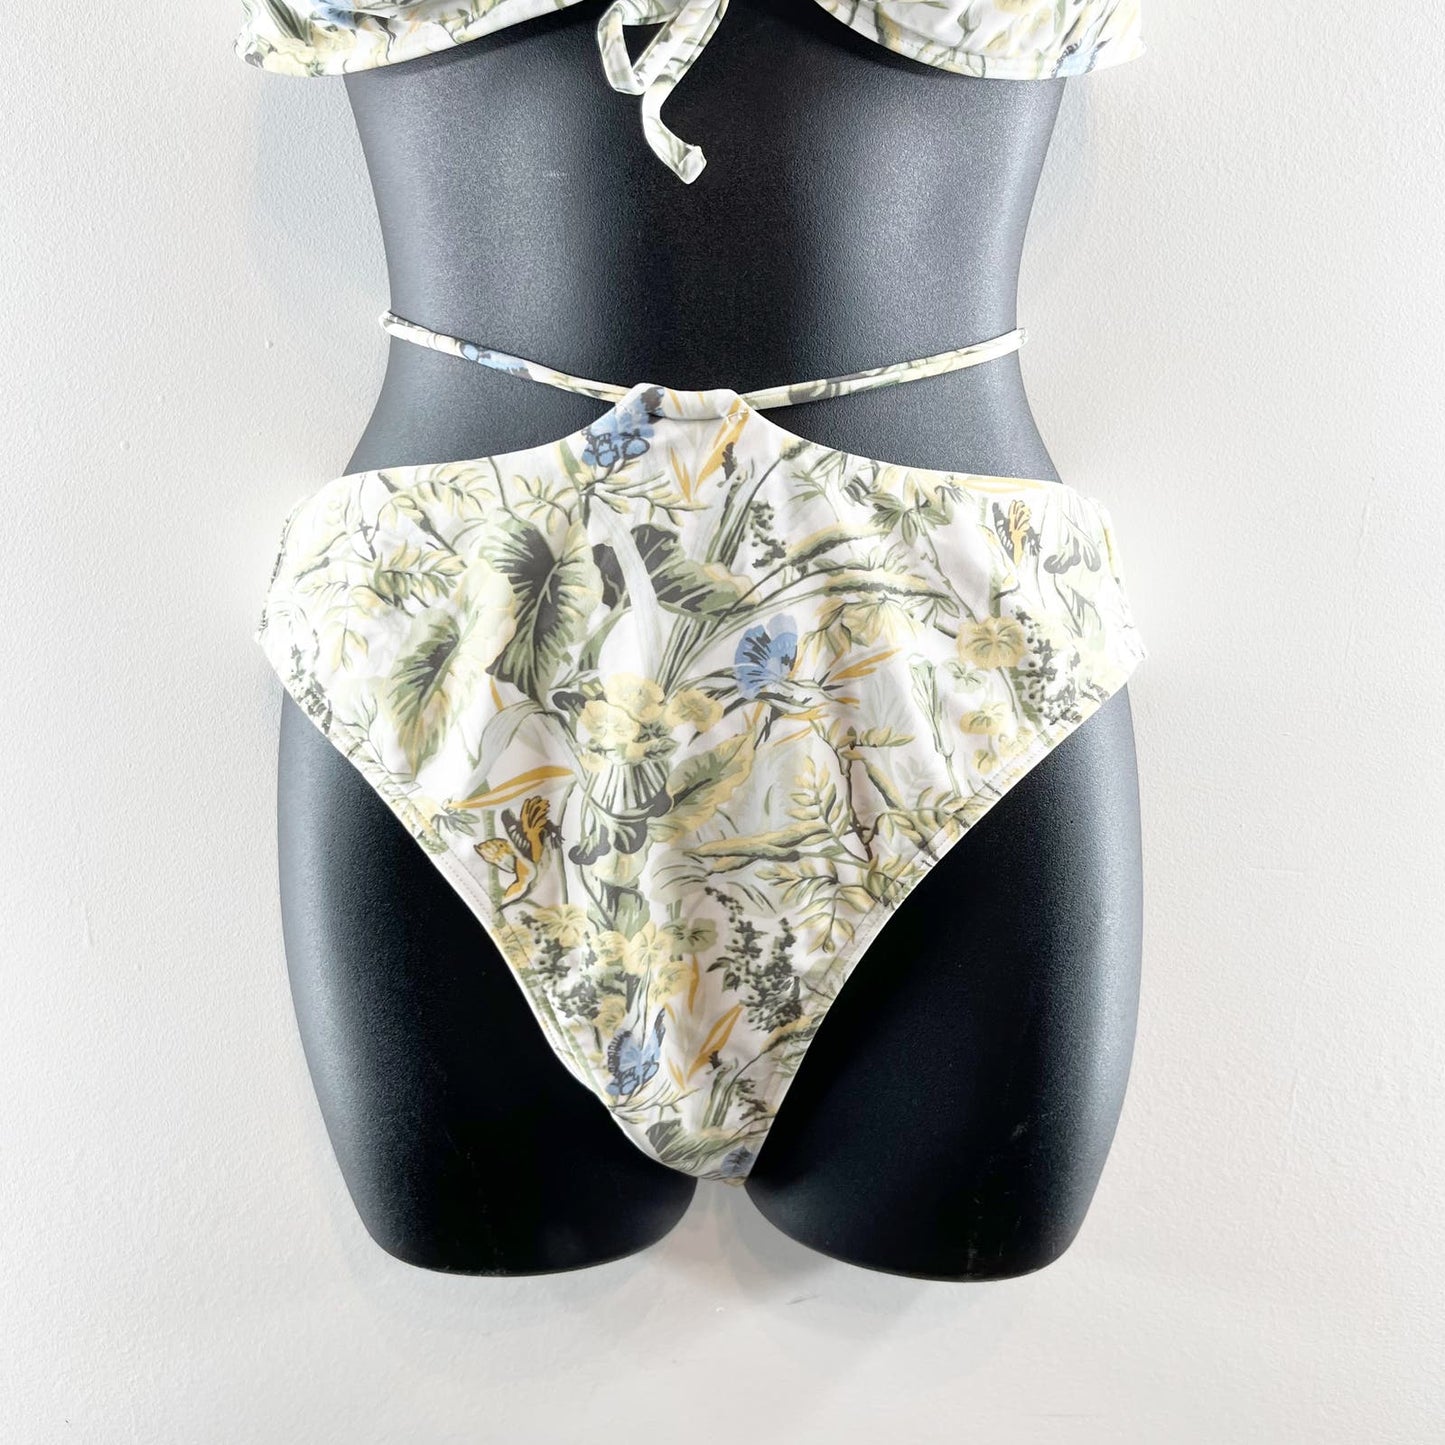 Abercrombie & Fitch Cinched Bandeau Top High Waist Bottom Bikini White Floral M